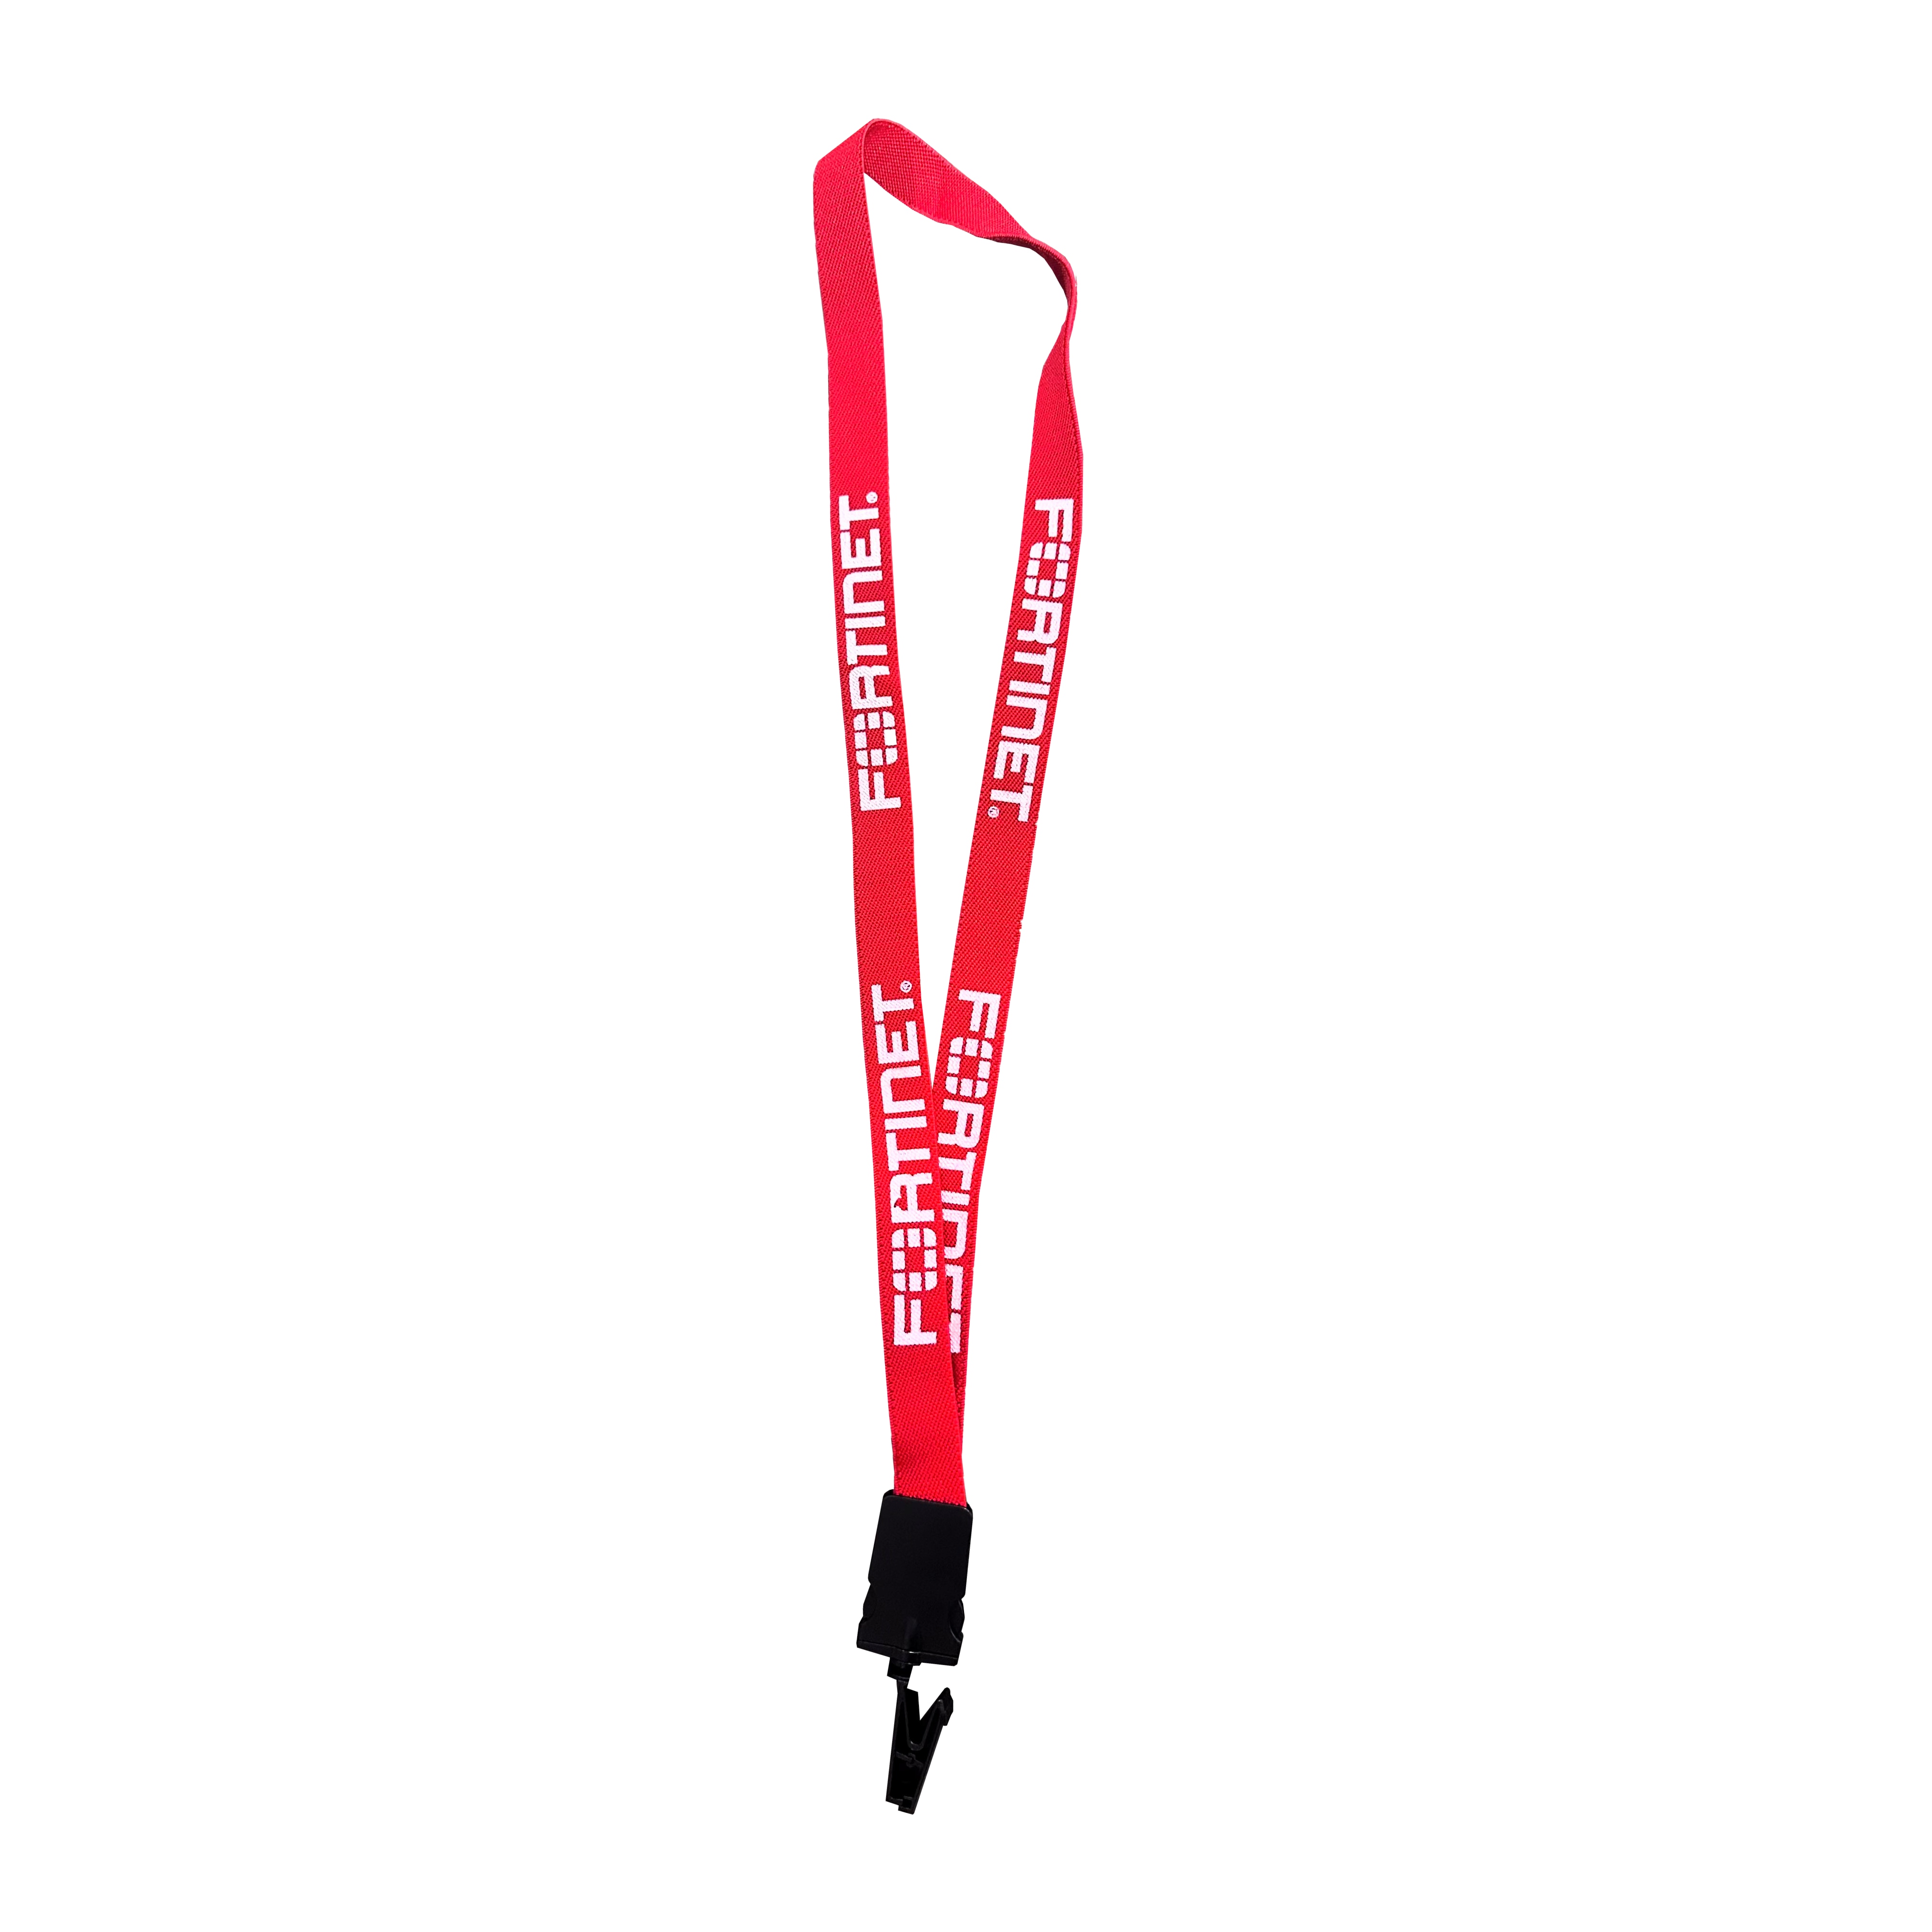 3/4" Stretchy elastic lanyard with plastic snap-buckle release and bulldog clip